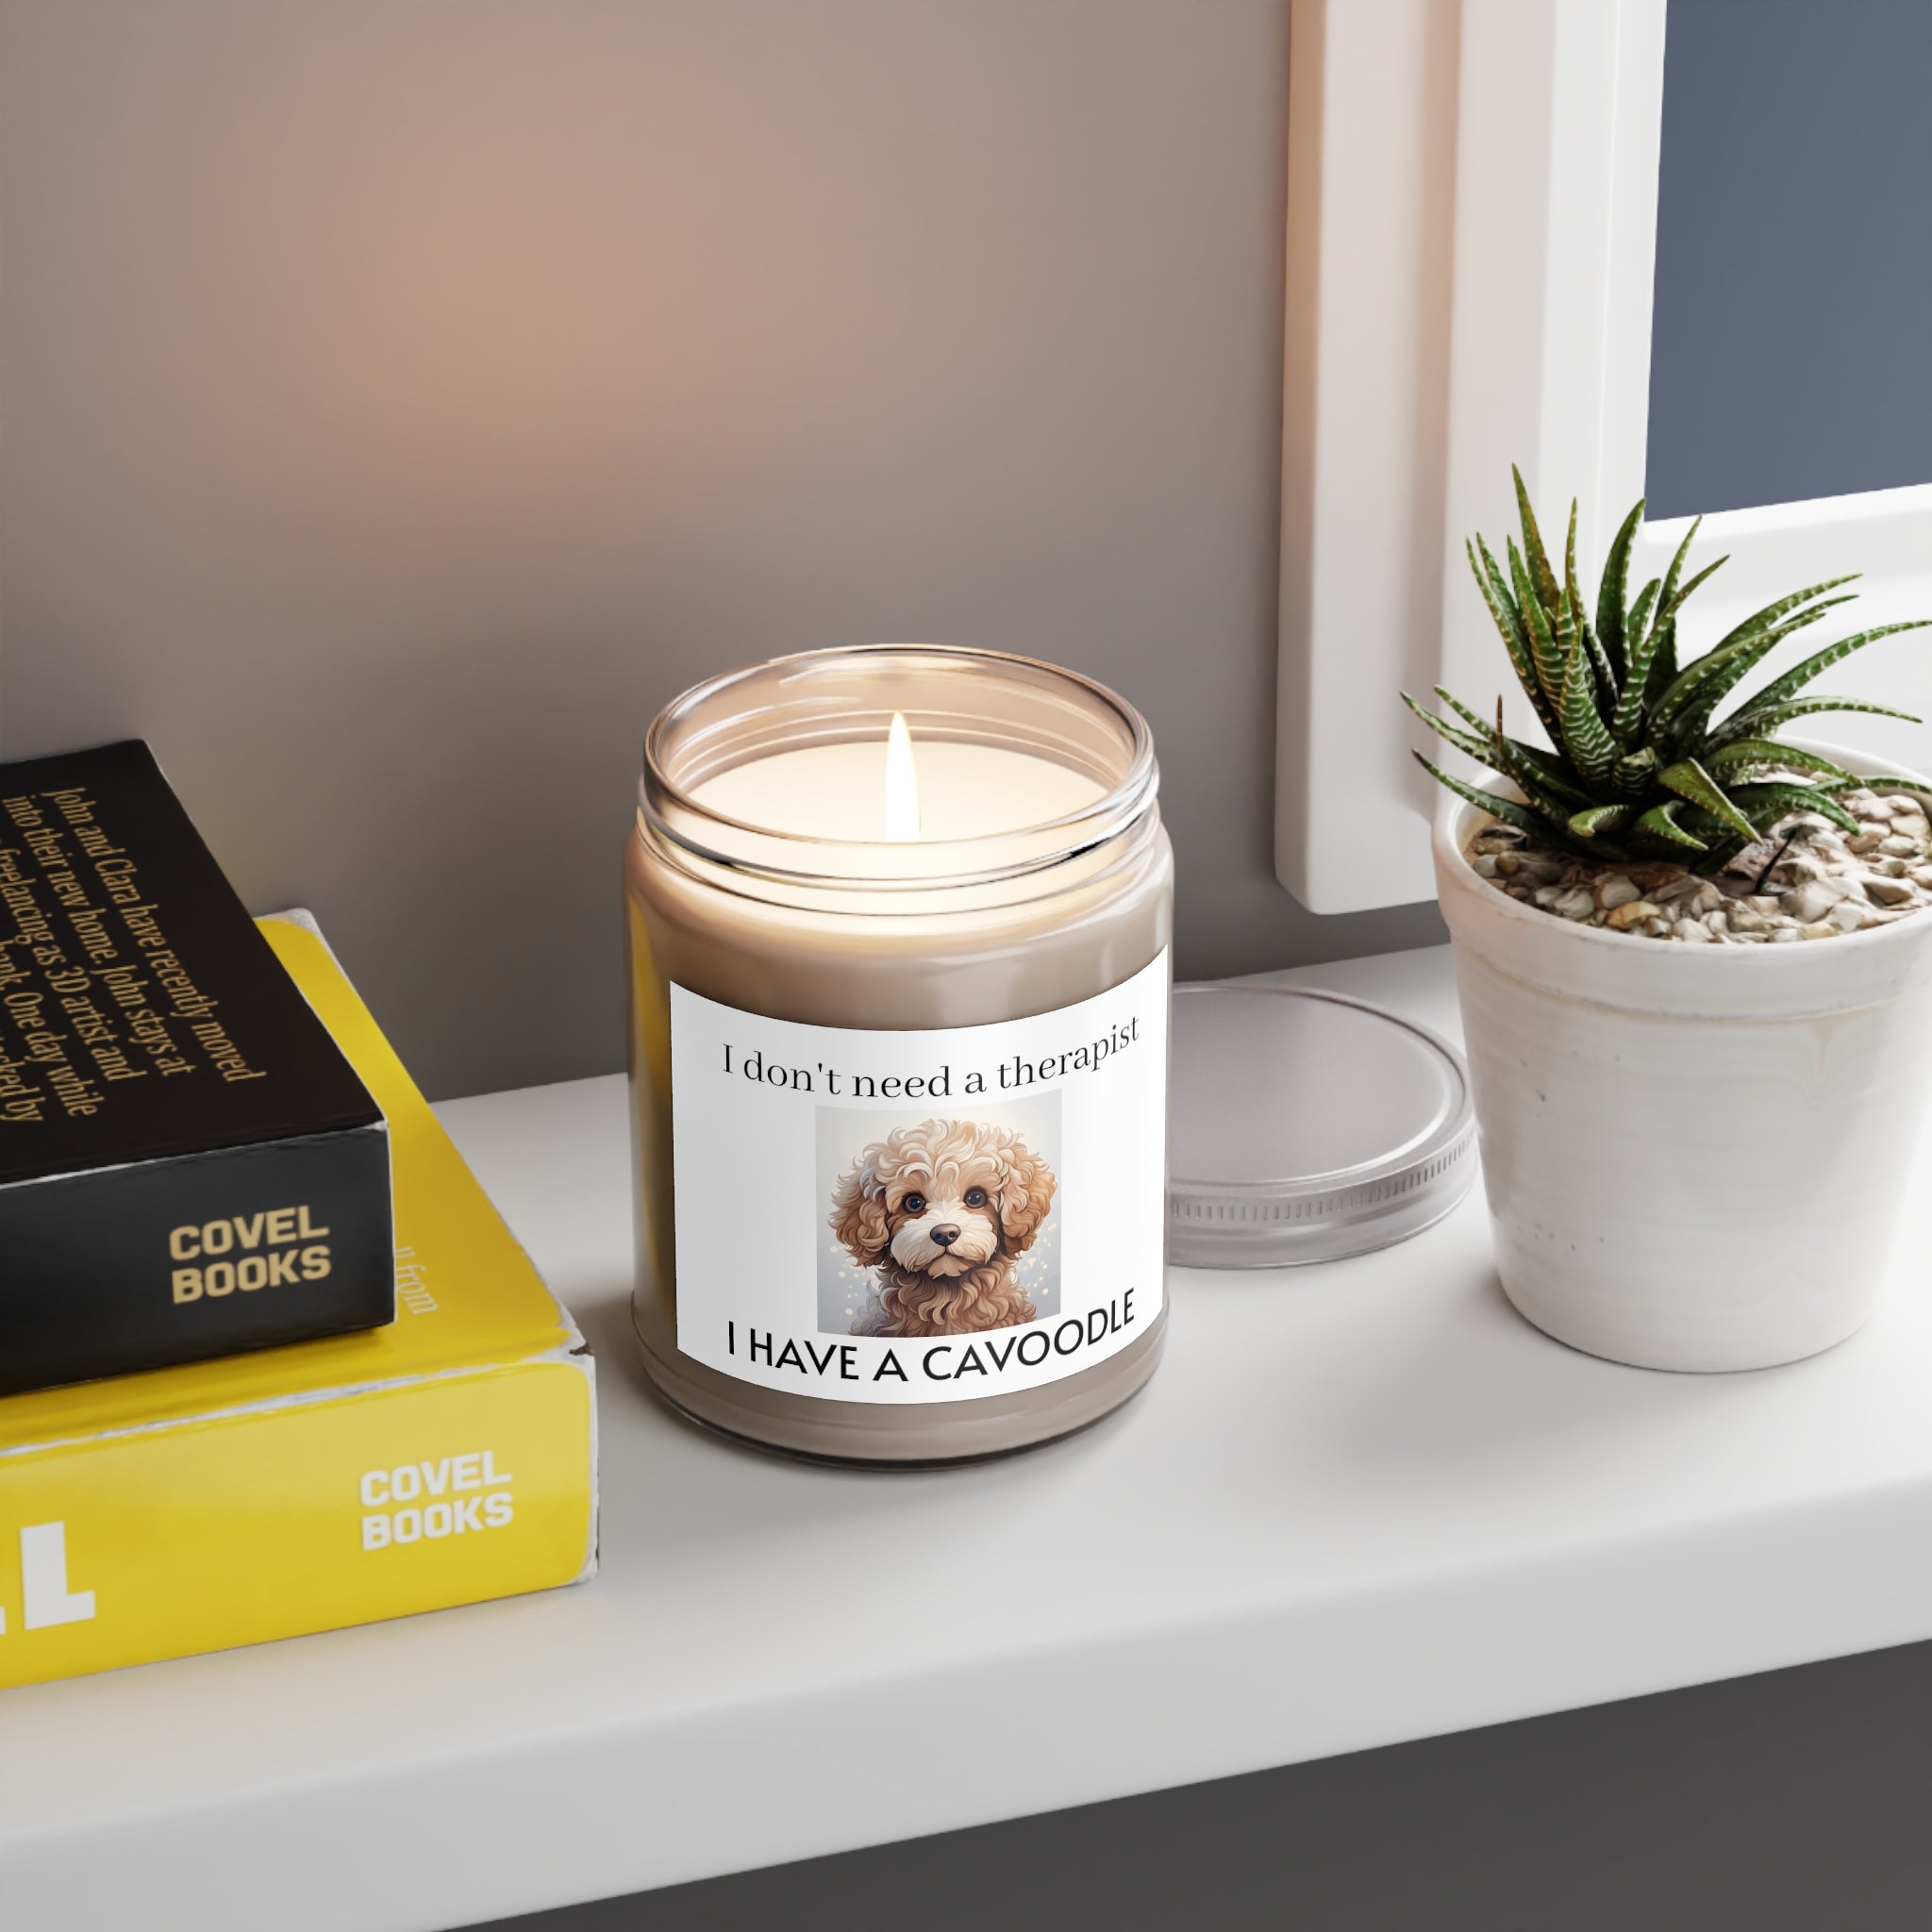 Apricot Cavoodle Candle Scented Candles, 255g